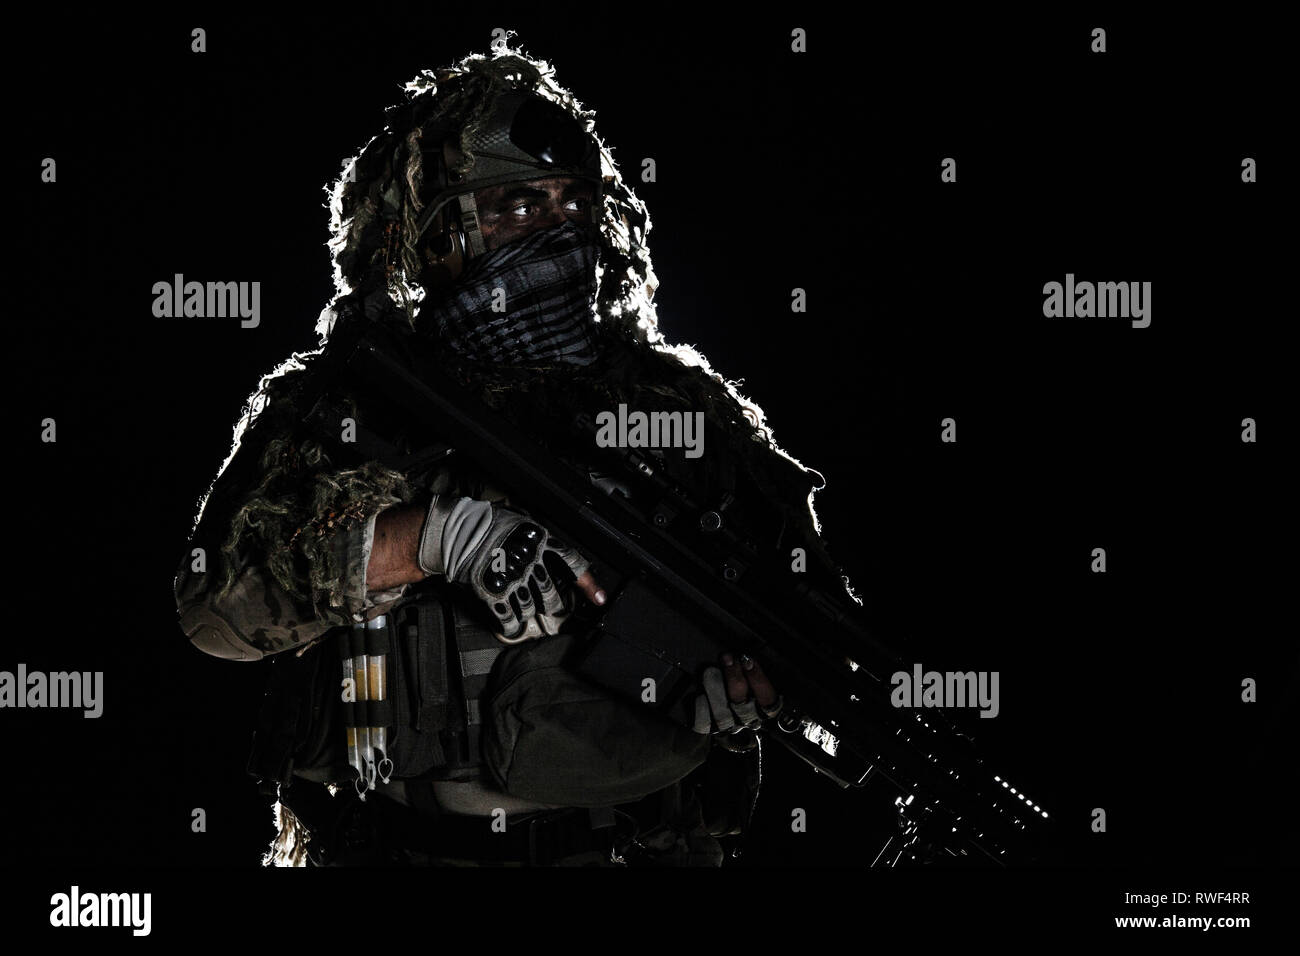 Army sniper with painted face, holding a big rifle. Stock Photo